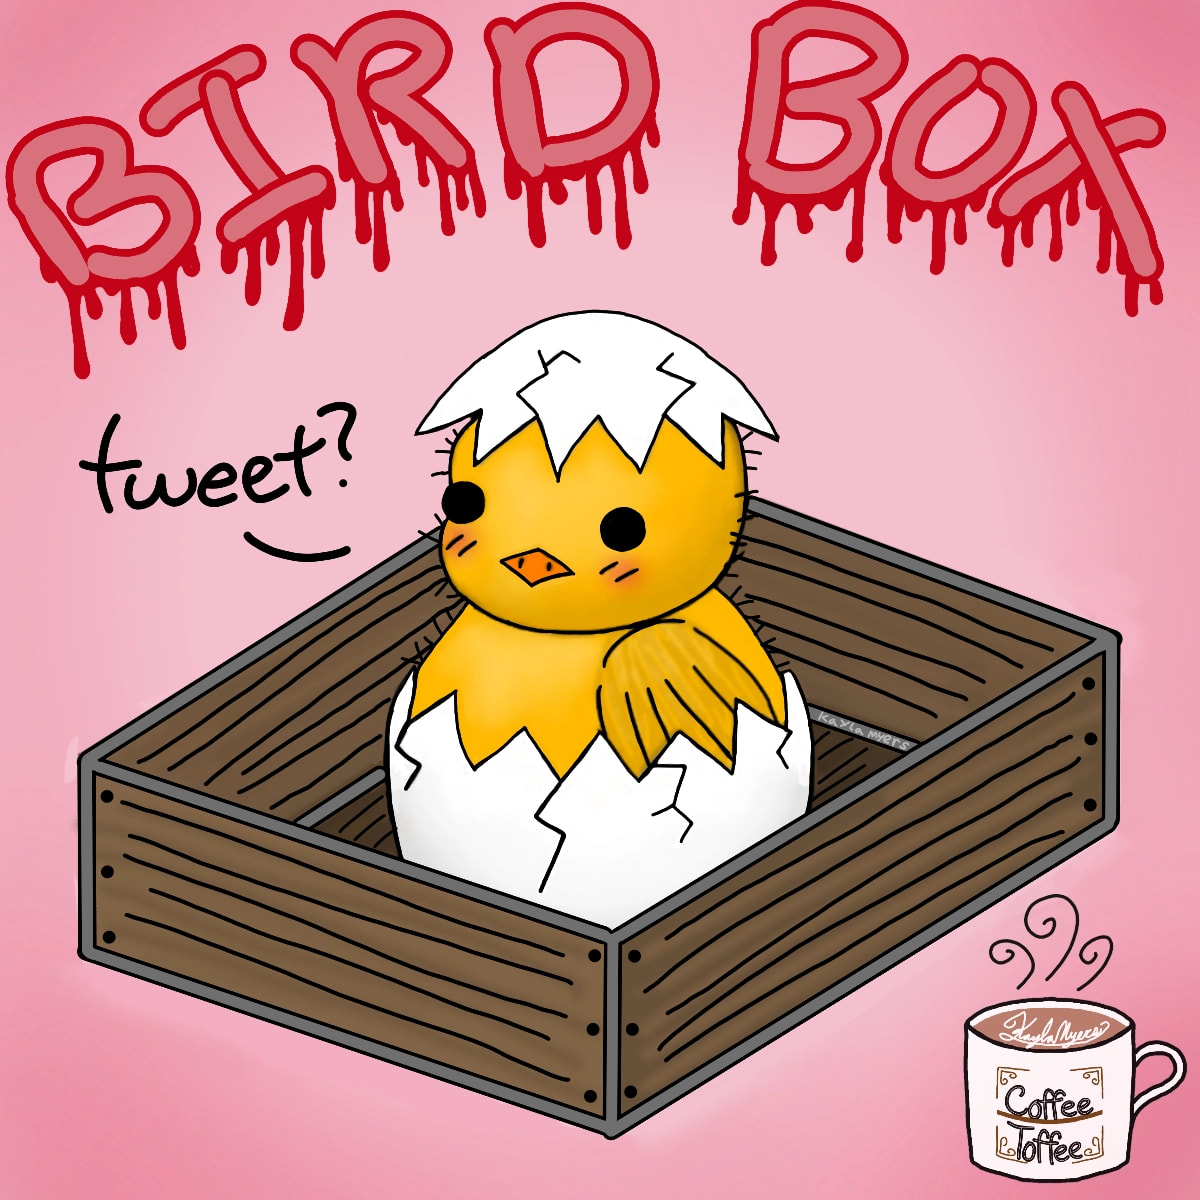 #MyChallenge is draw your favorite movie but in a funny way! Mine is bird box from Netflix 🤣🐣#Animal #Bird #birds #white #yellow #Furry #egg #cute #pink #japan #japanese #kpop #sketch #digitalart